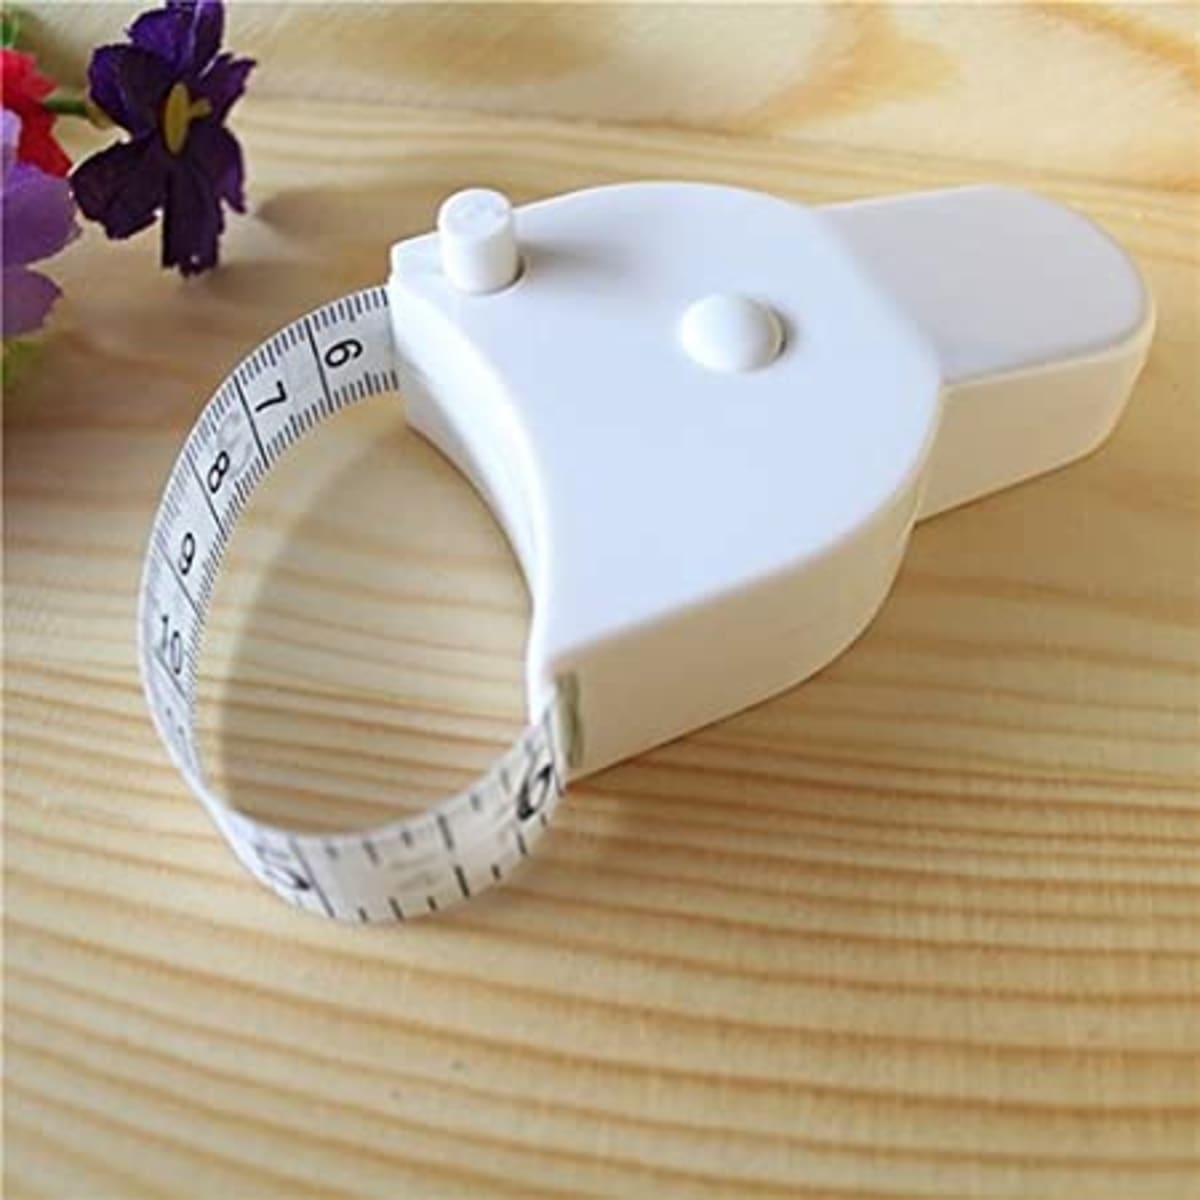 GCP Products 4Pcs Body Measure Tape, Automatic Telescopic Tape Measure,  Accurate Measuring Tape For Body, Body